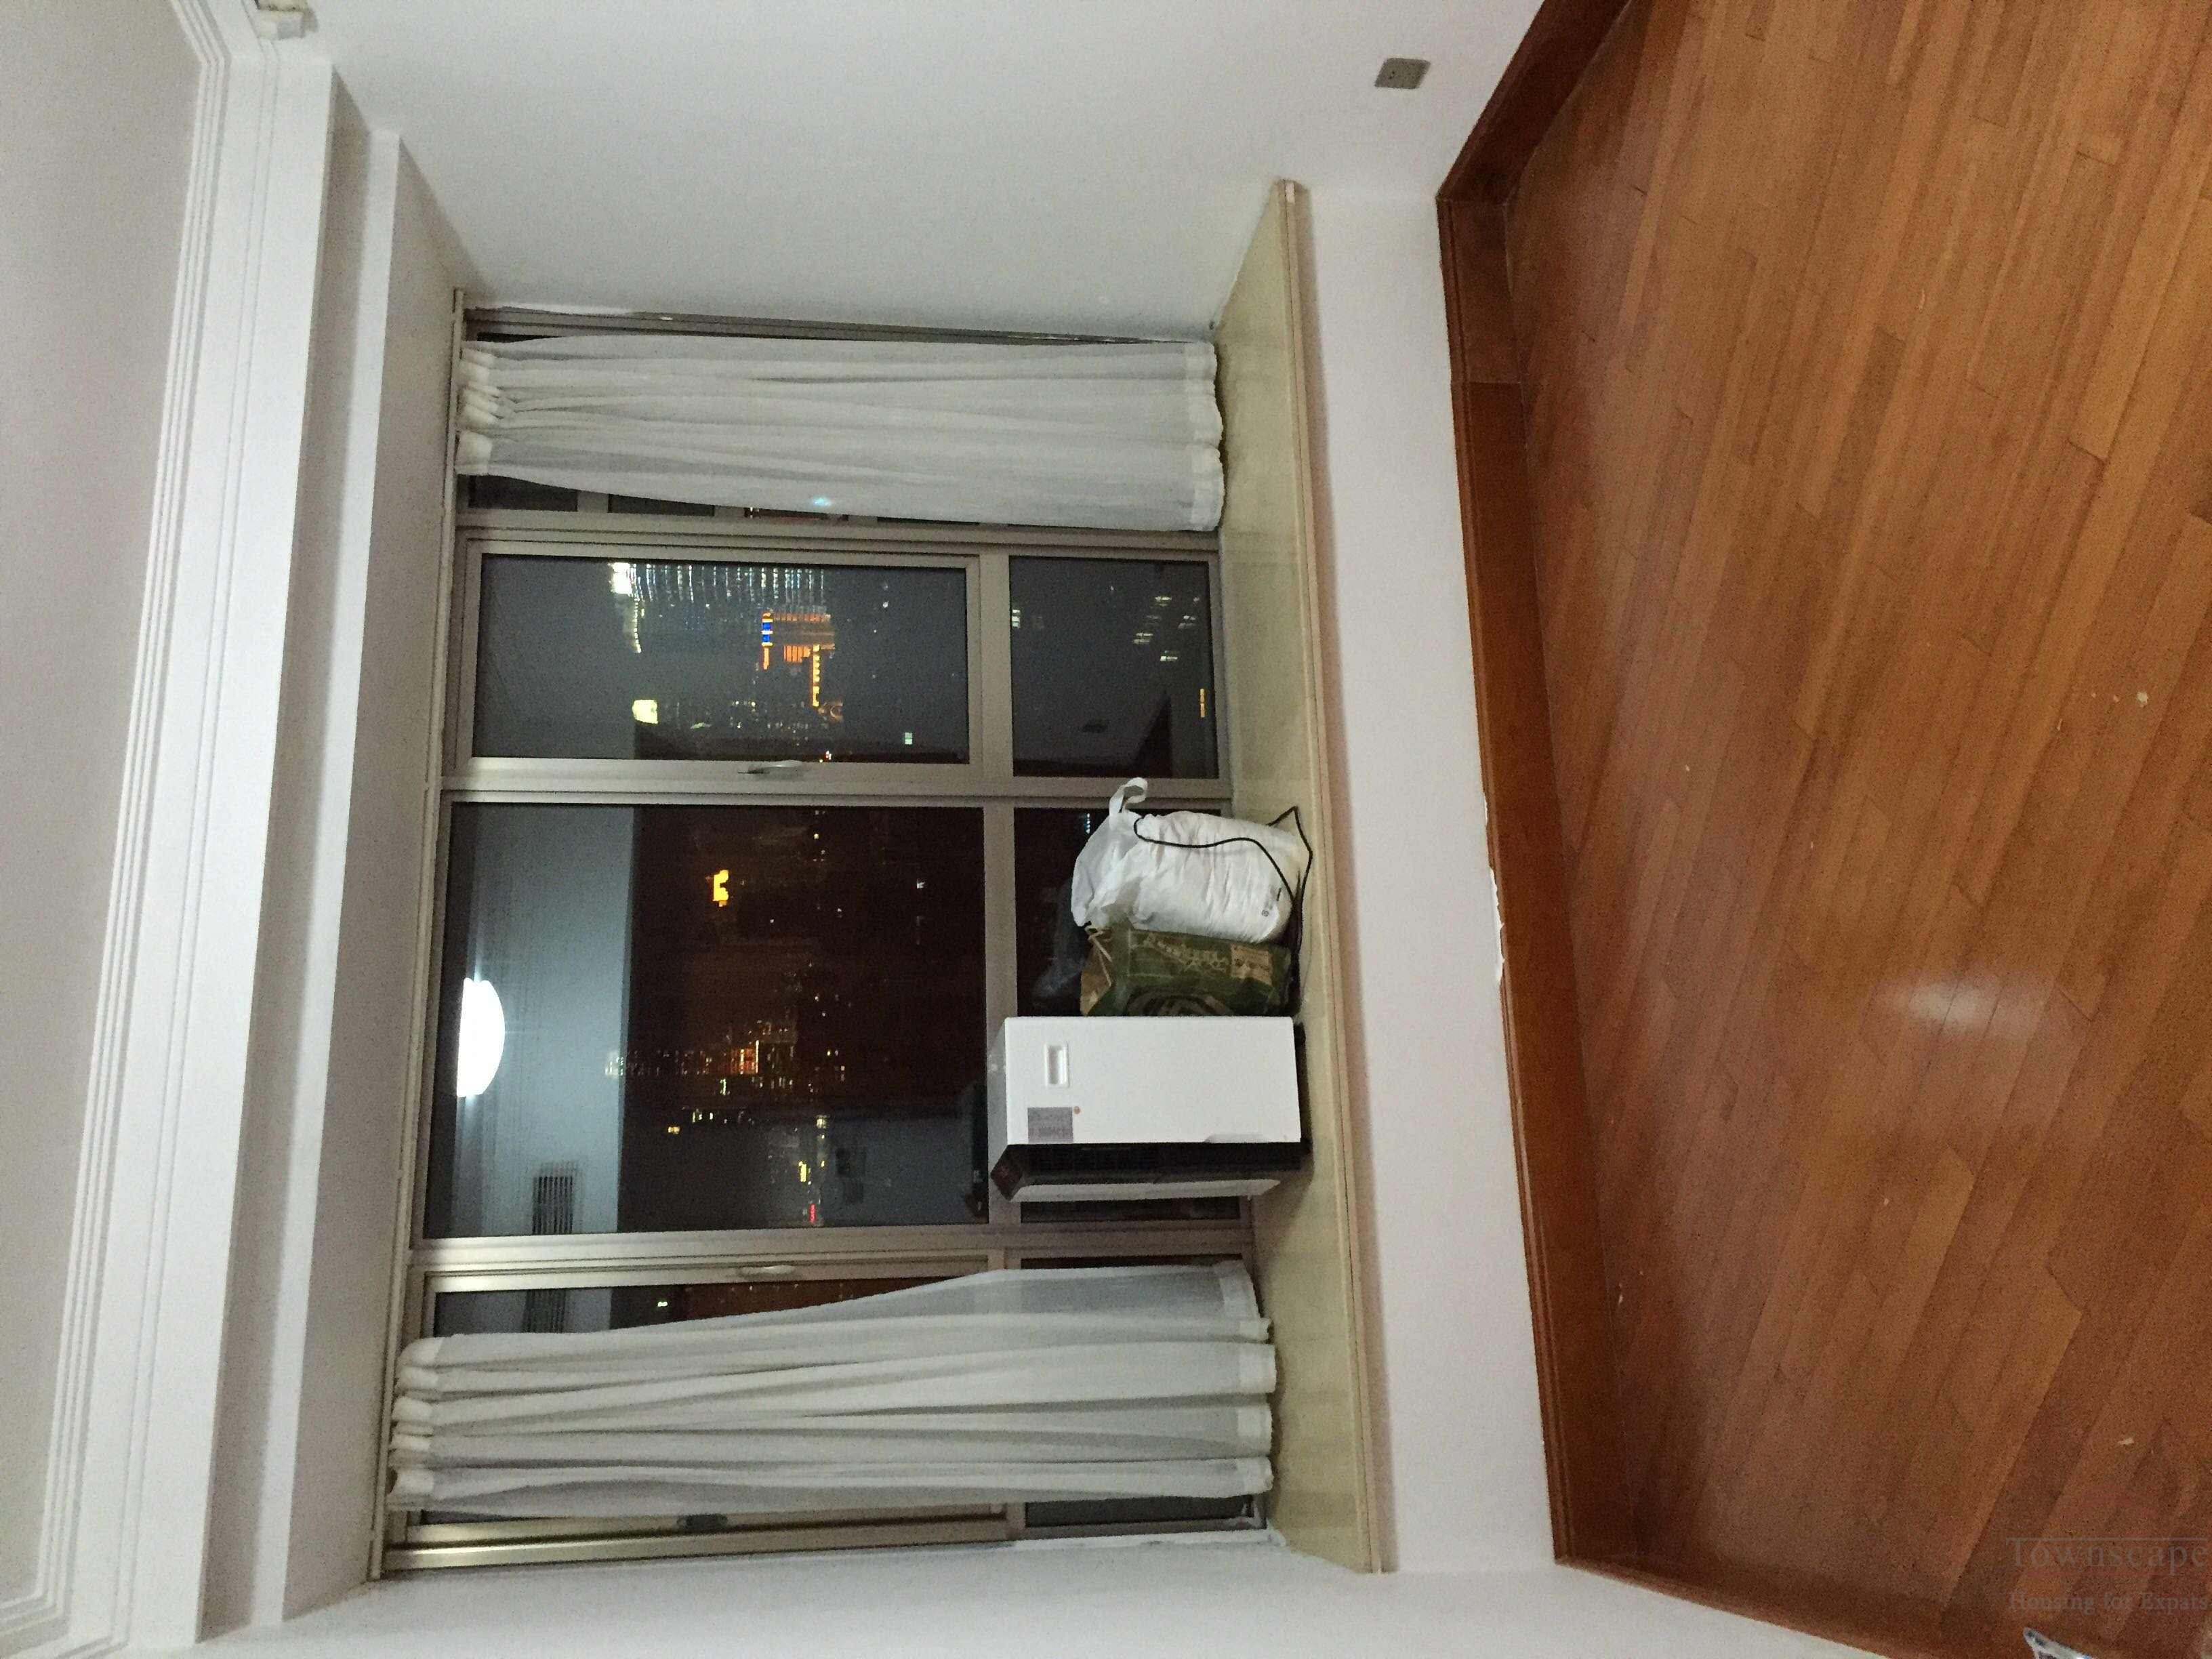  Spacious 3BR Apartment for rent in Le Marquis, near Jiashan Road Metro